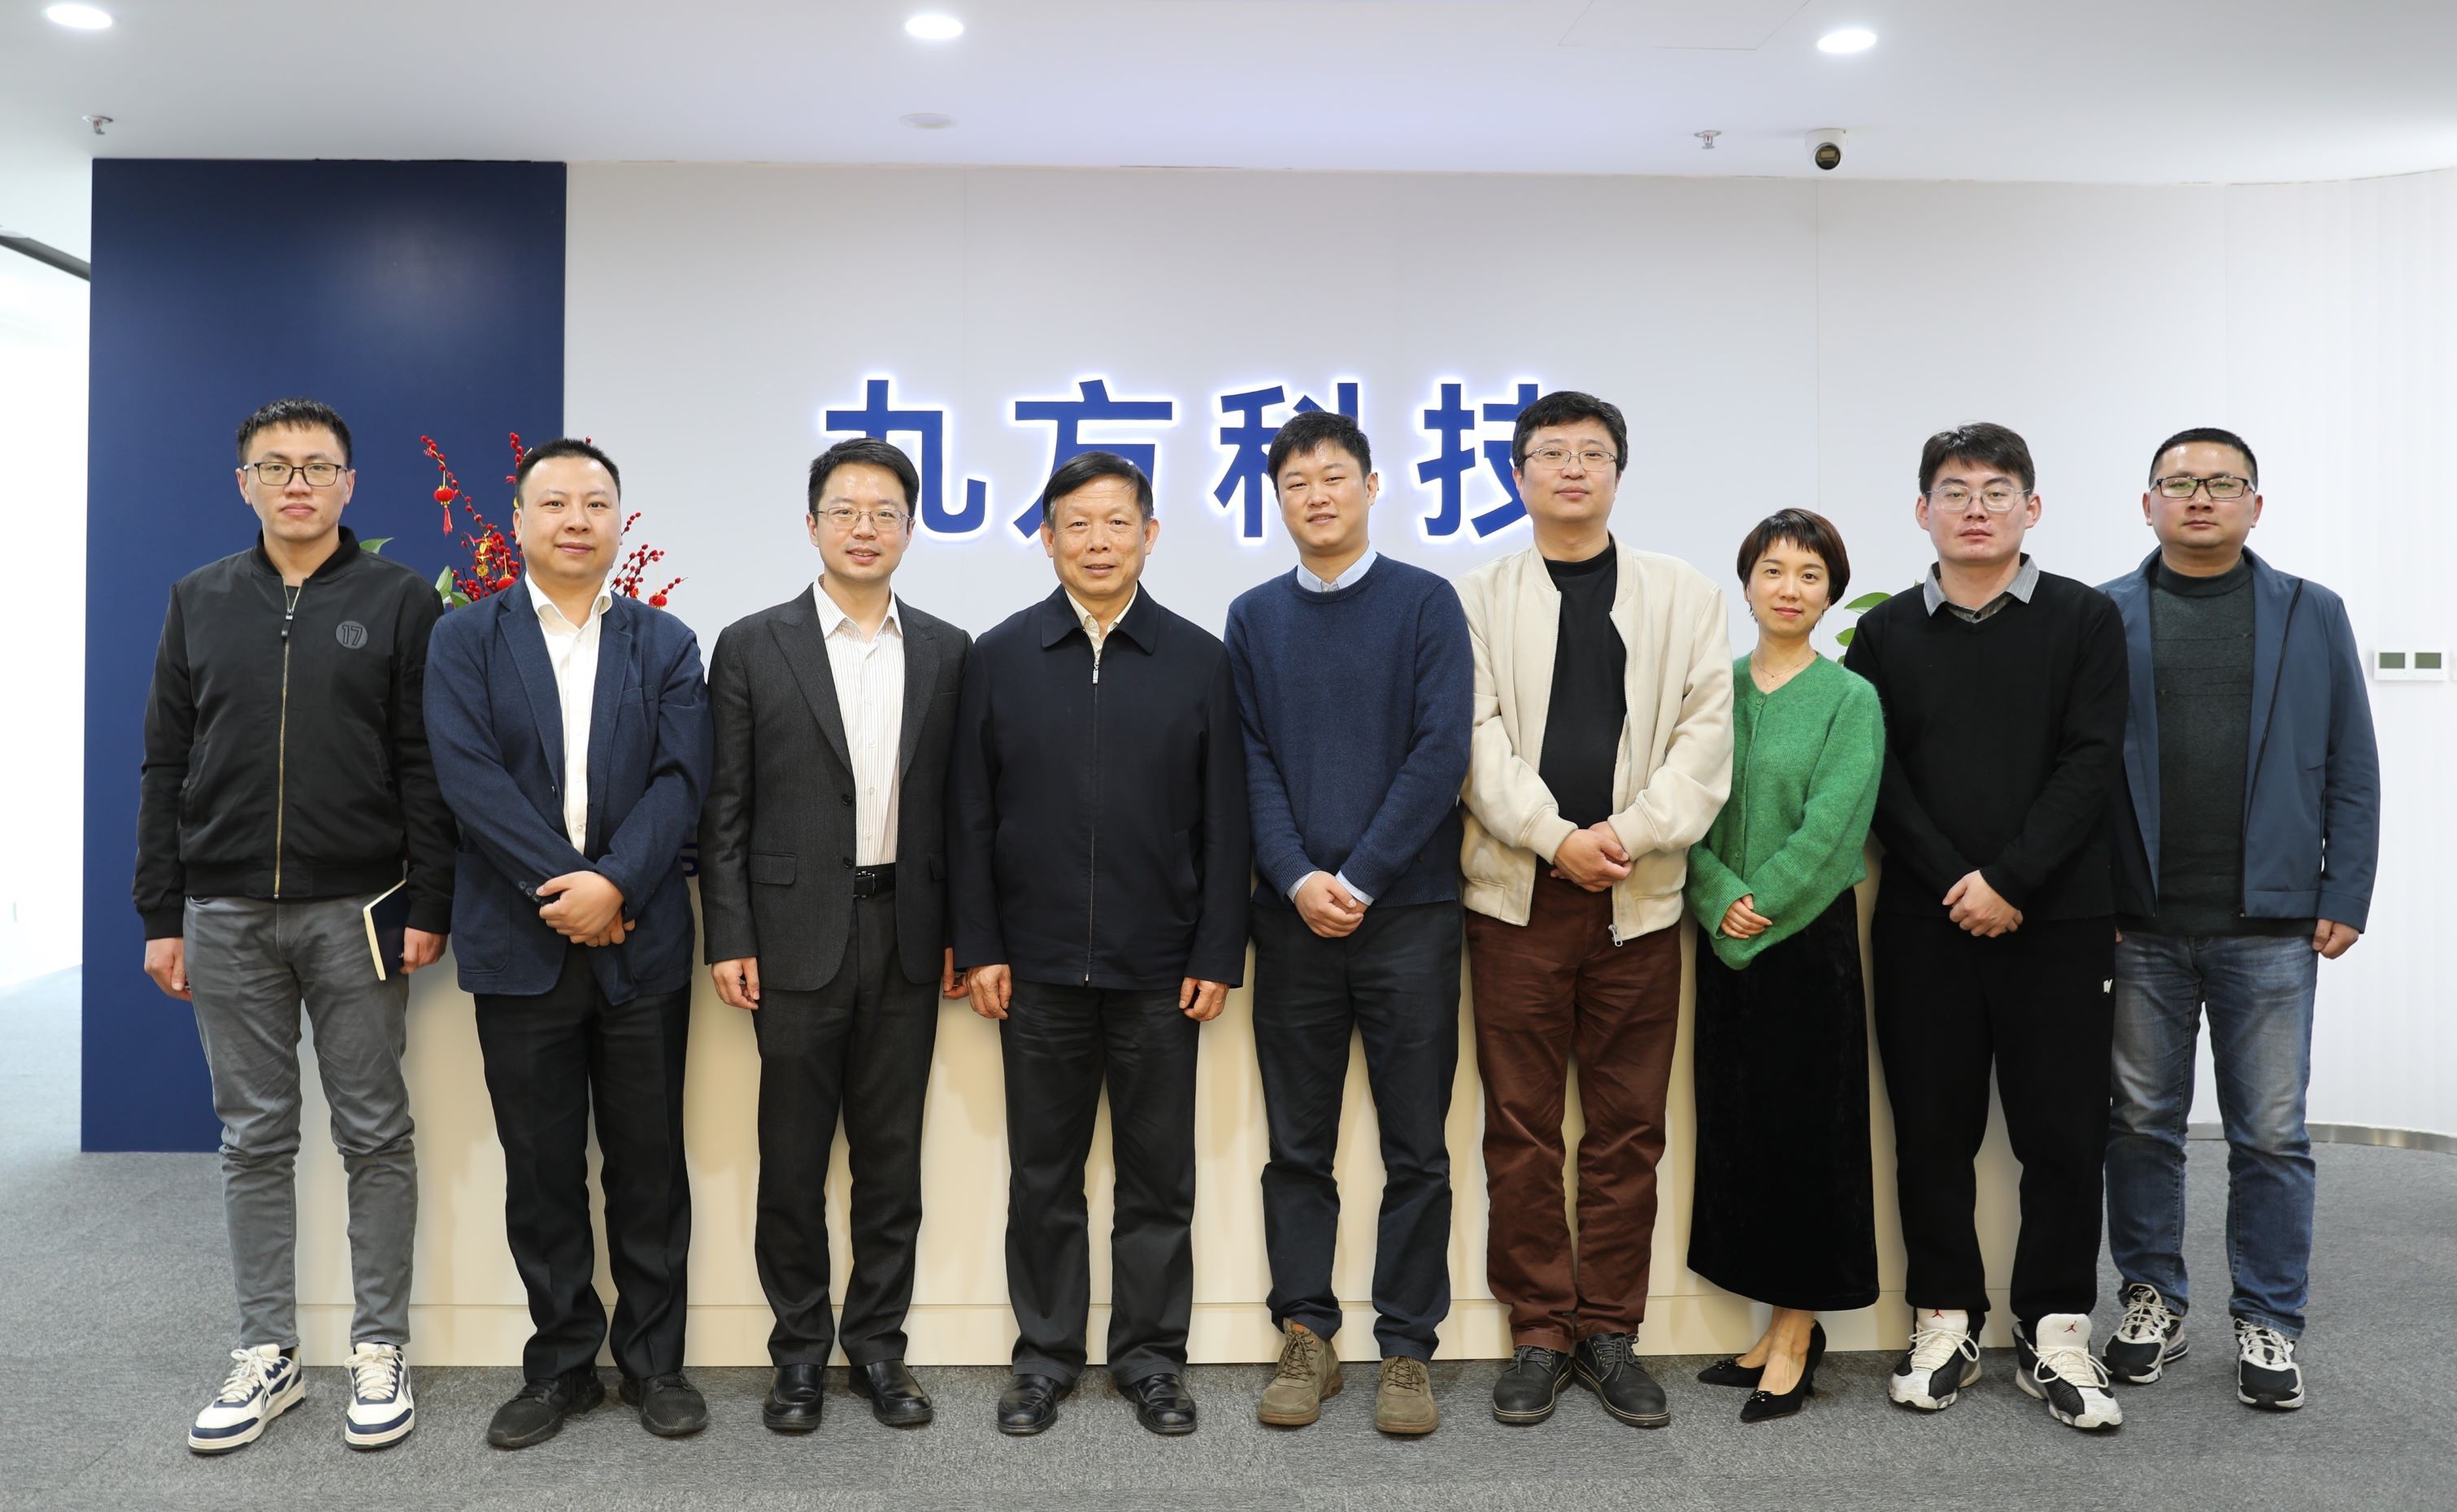 China Meteorological Service Association (CMSA) President Xu Xiaofeng and the Delegation Visit Ninecosmos